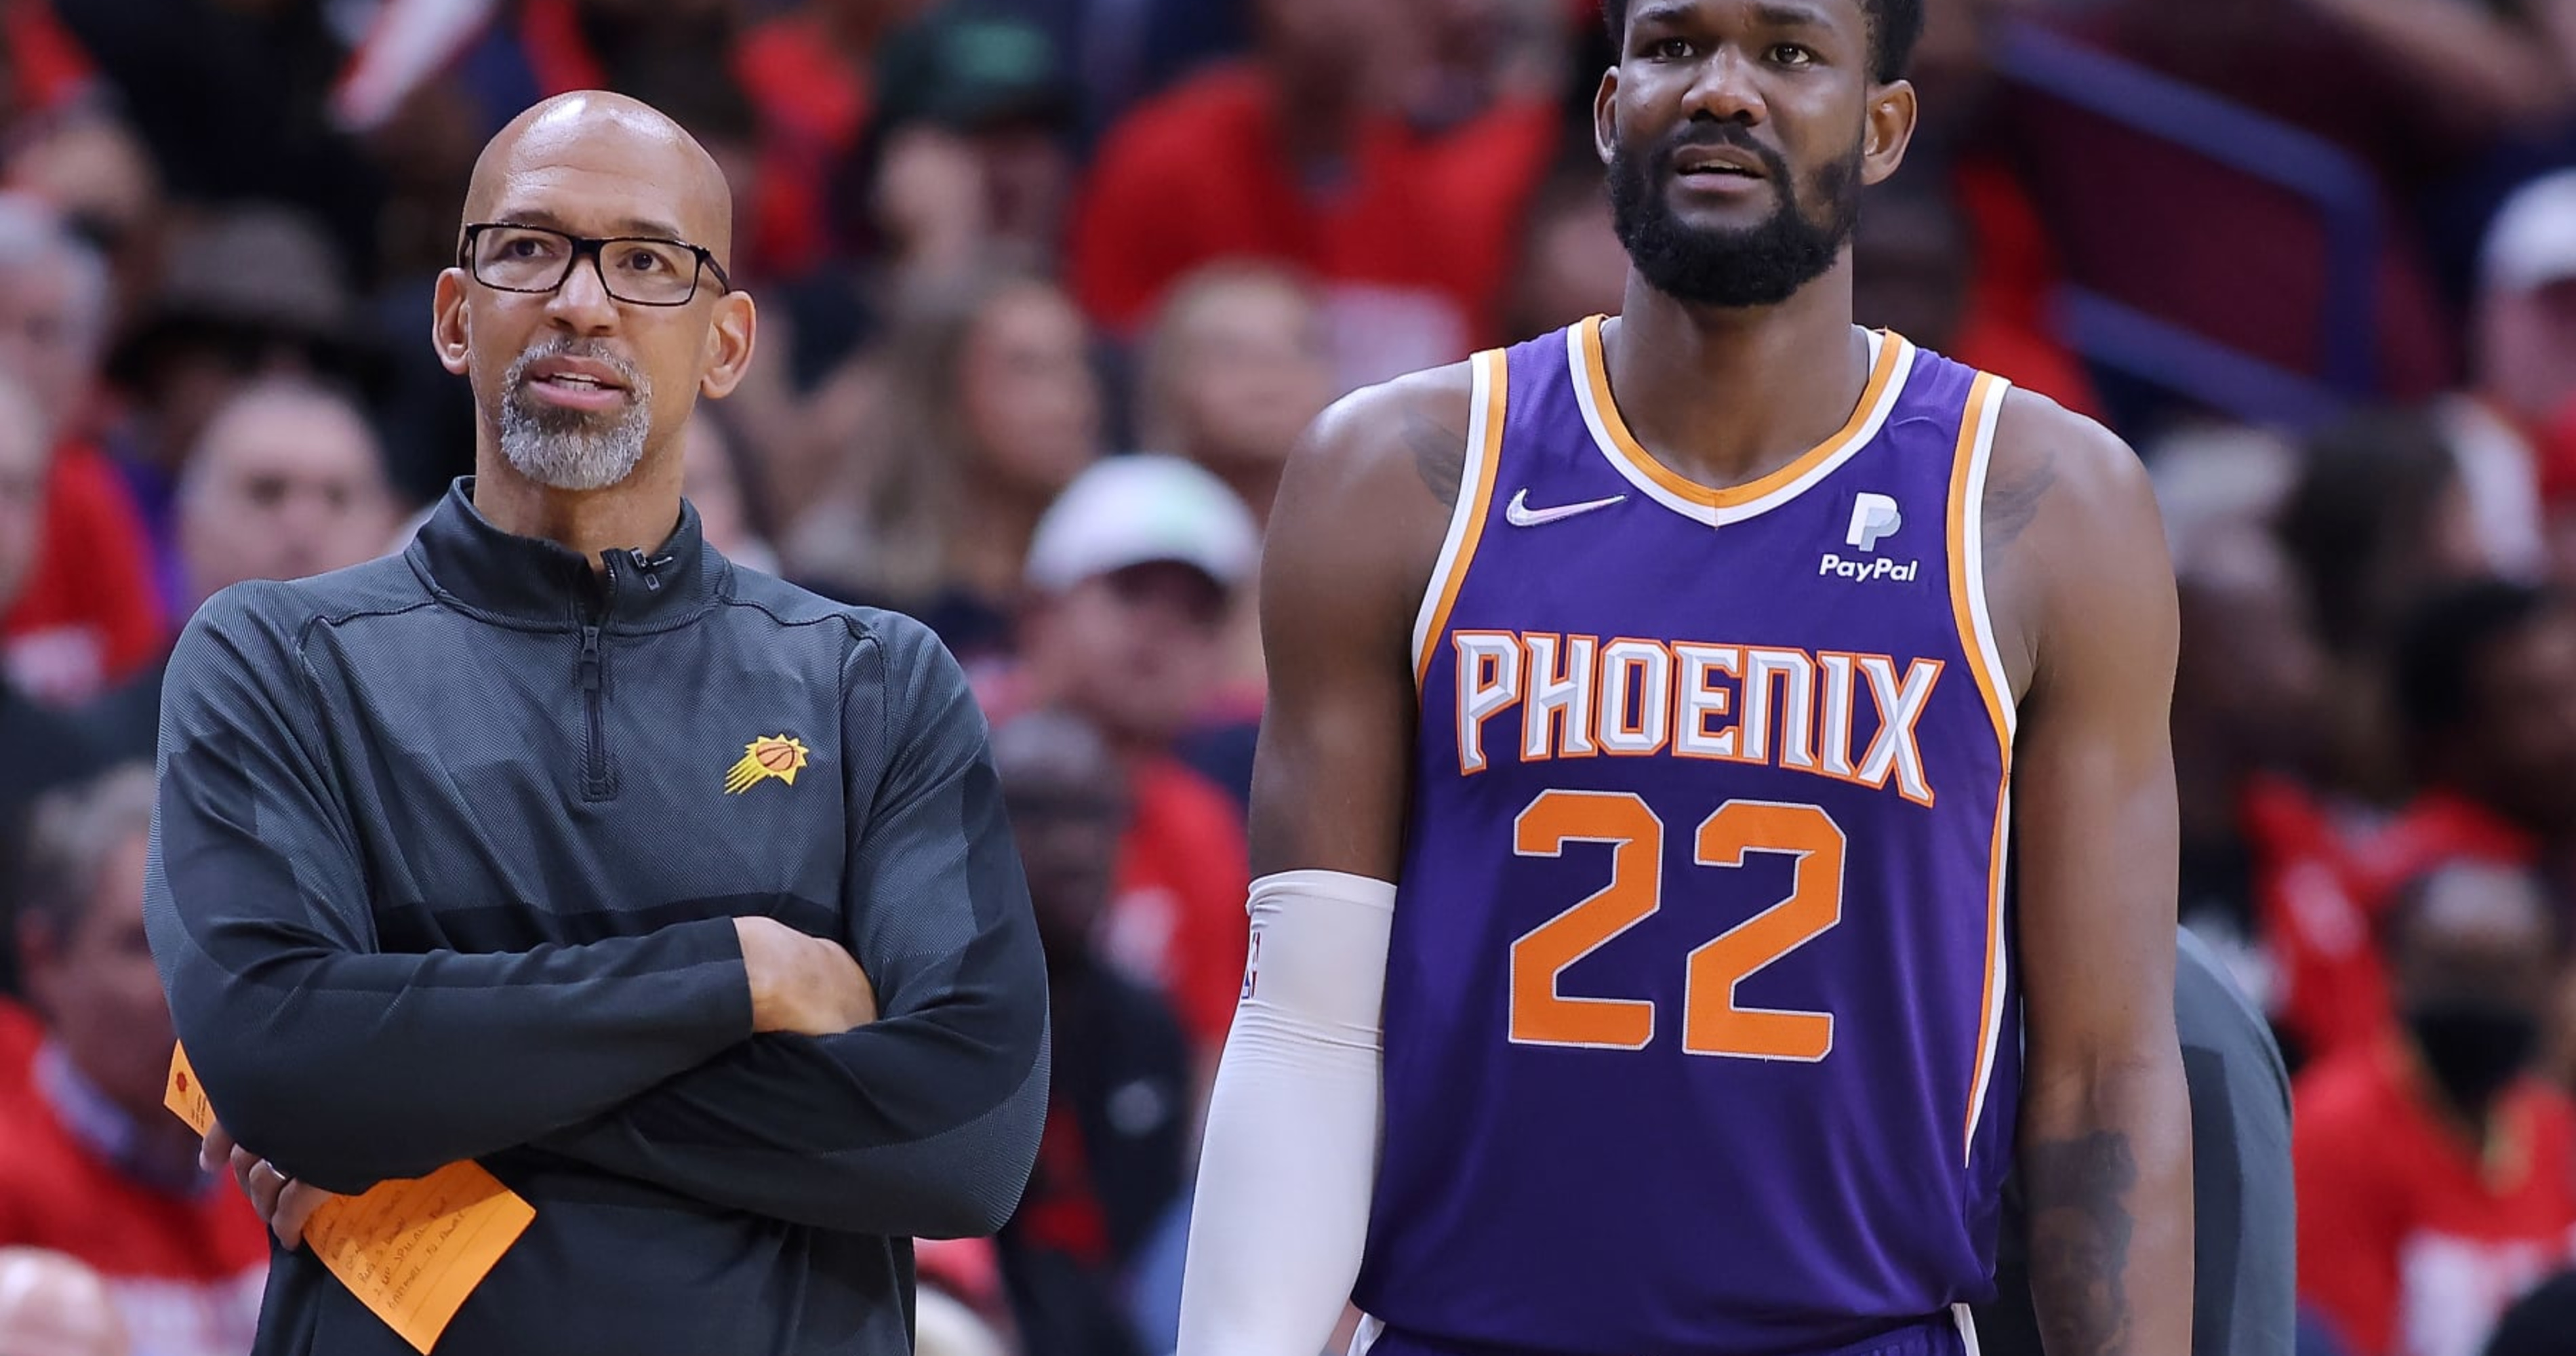 Deandre Ayton Says He Hasn't Spoken to Suns HC Monty Williams Since Game 7 Benching